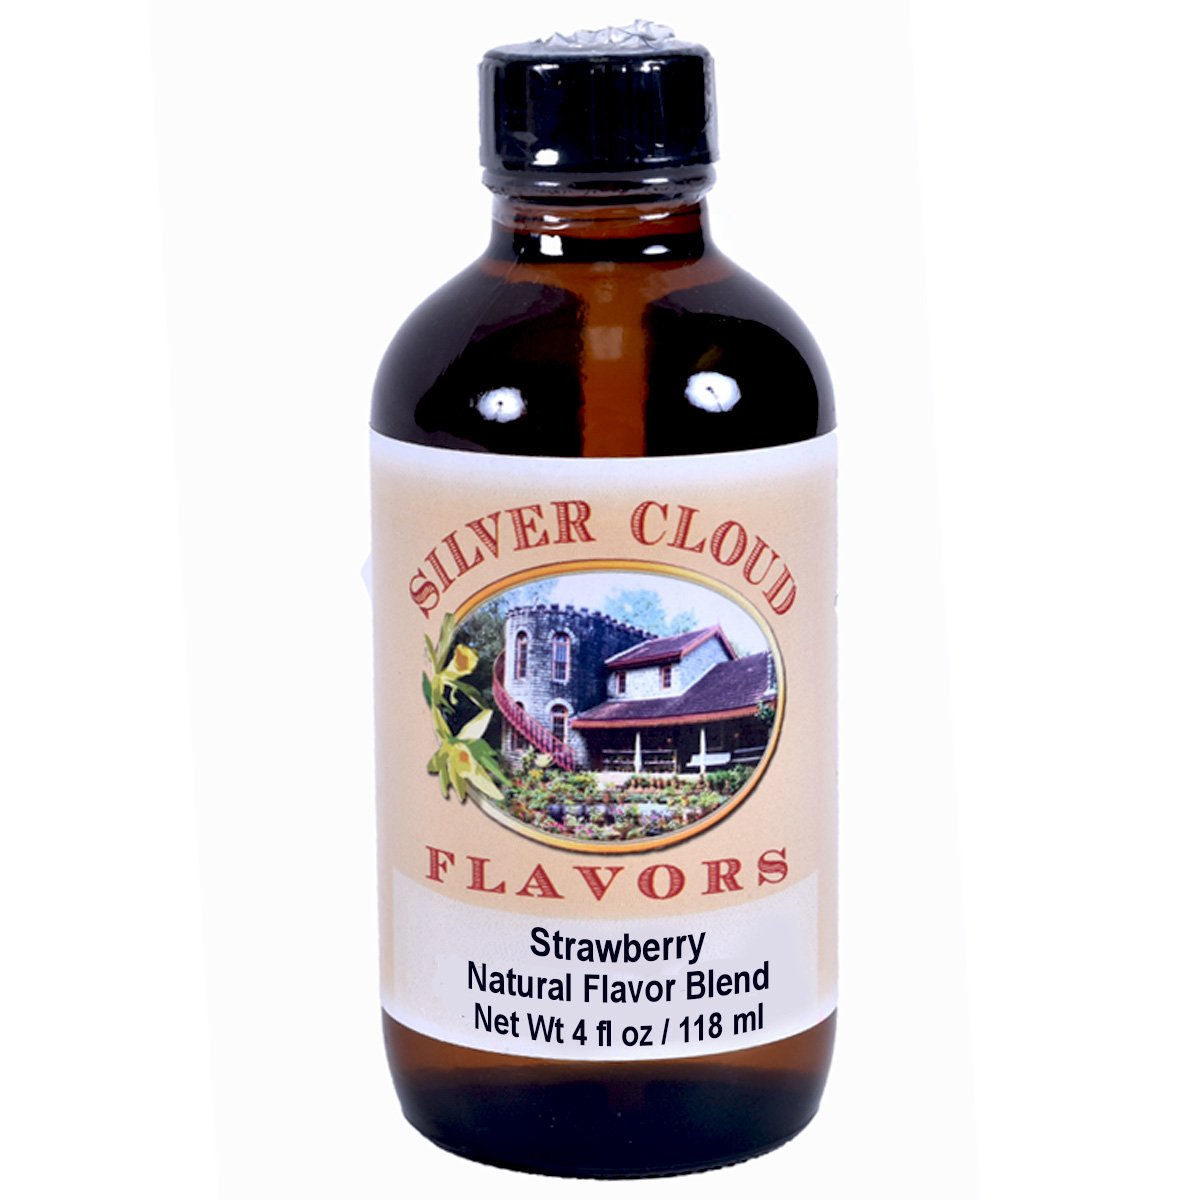 Strawberry, Natural Flavor Blend Silver Cloud Extract - Bake Supply Plus